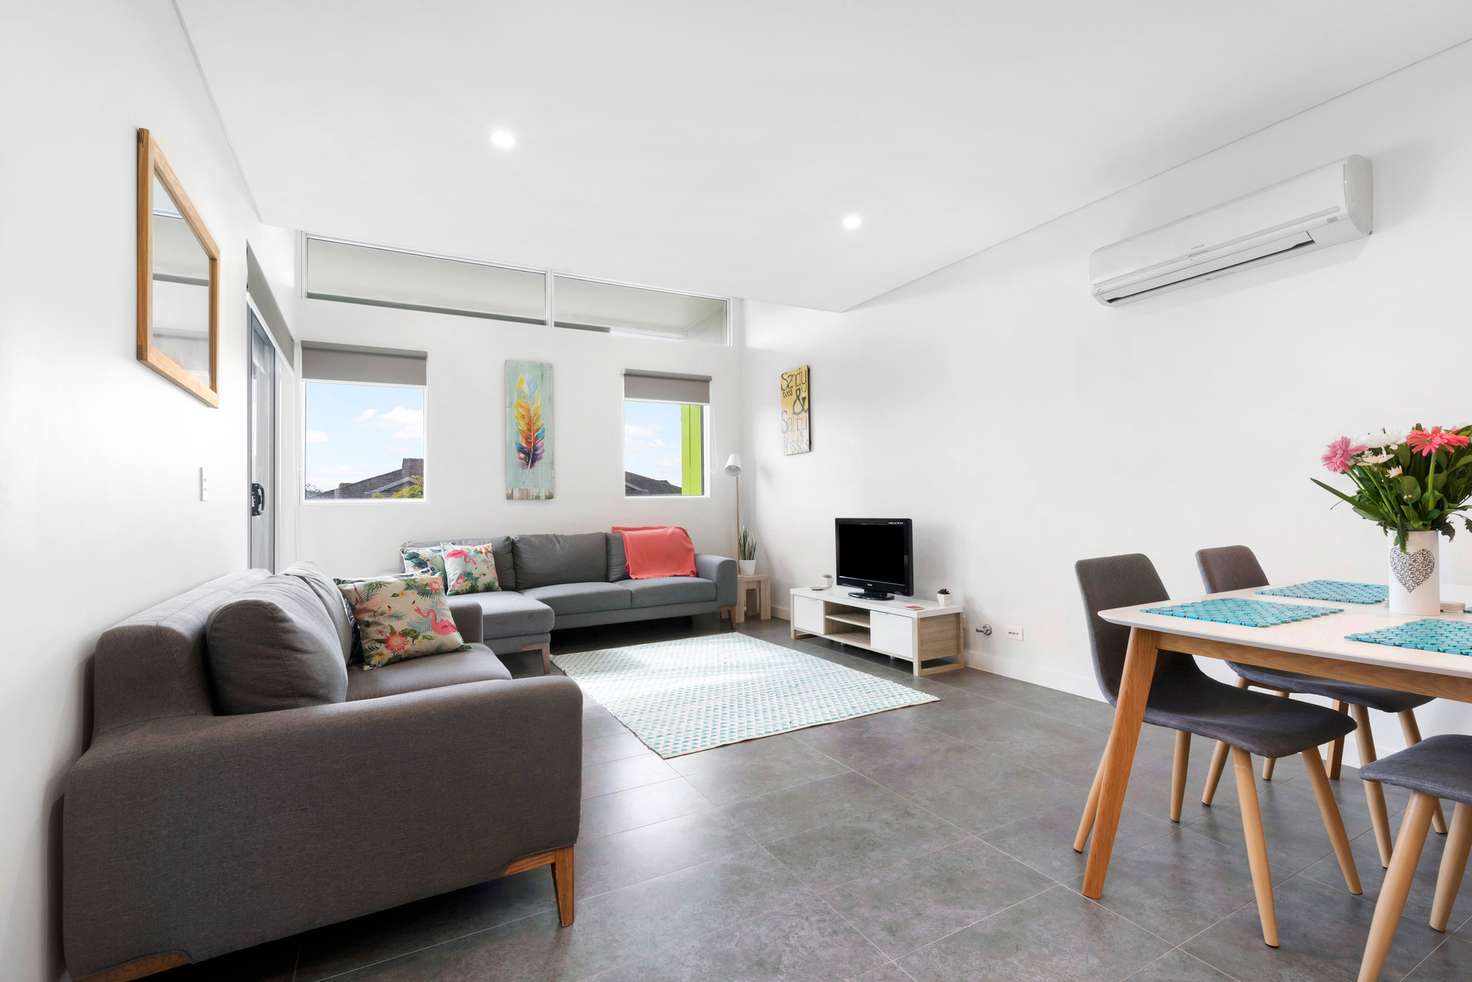 Main view of Homely apartment listing, 8/301 Condamine Street, Manly Vale NSW 2093